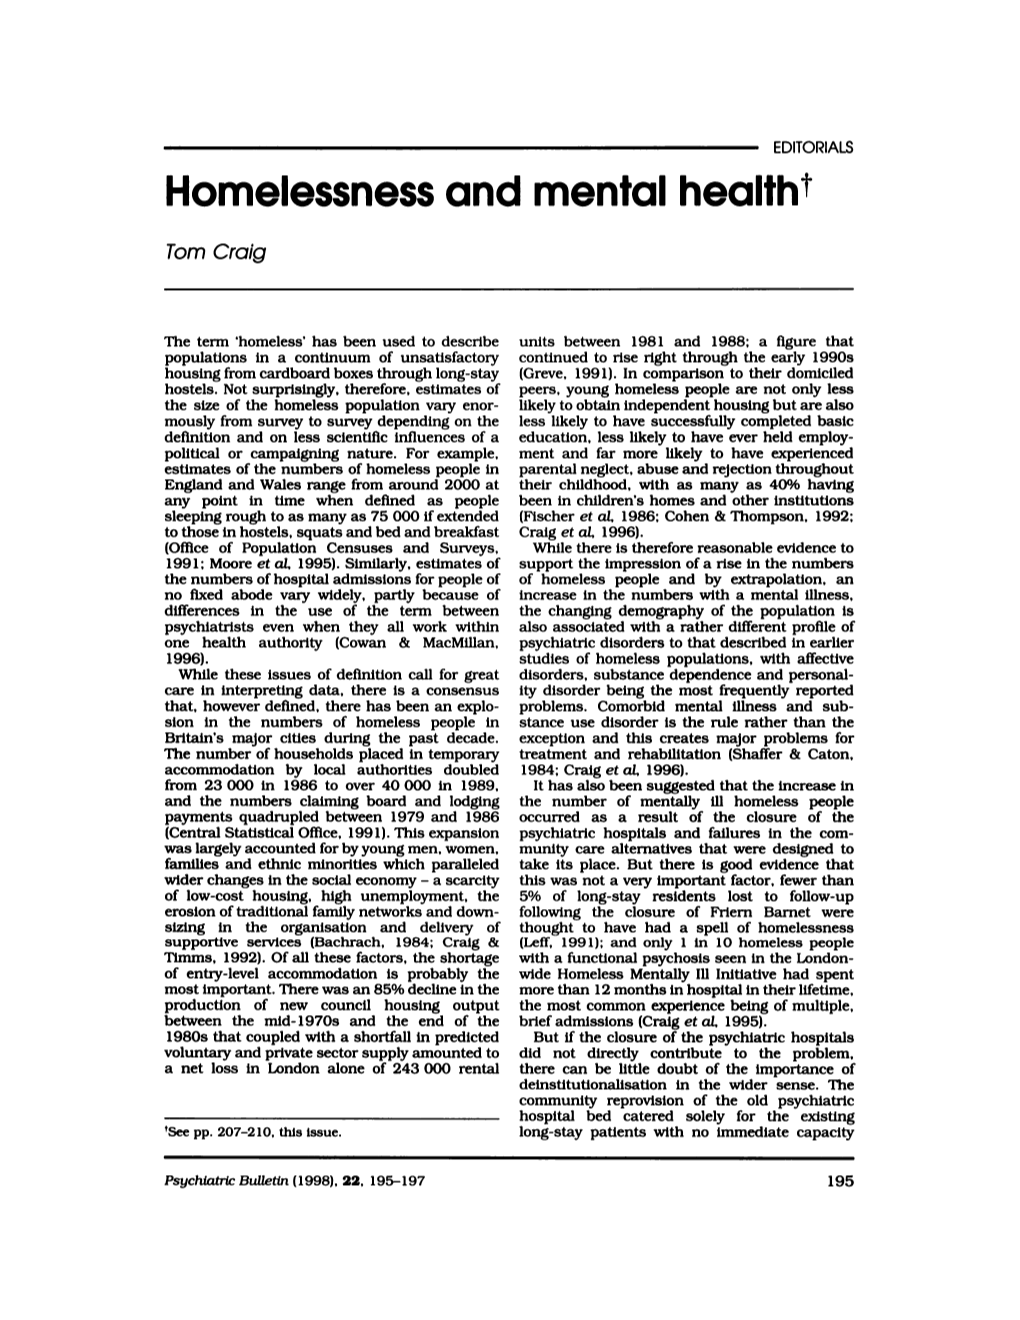 Homelessness and Mental Health;